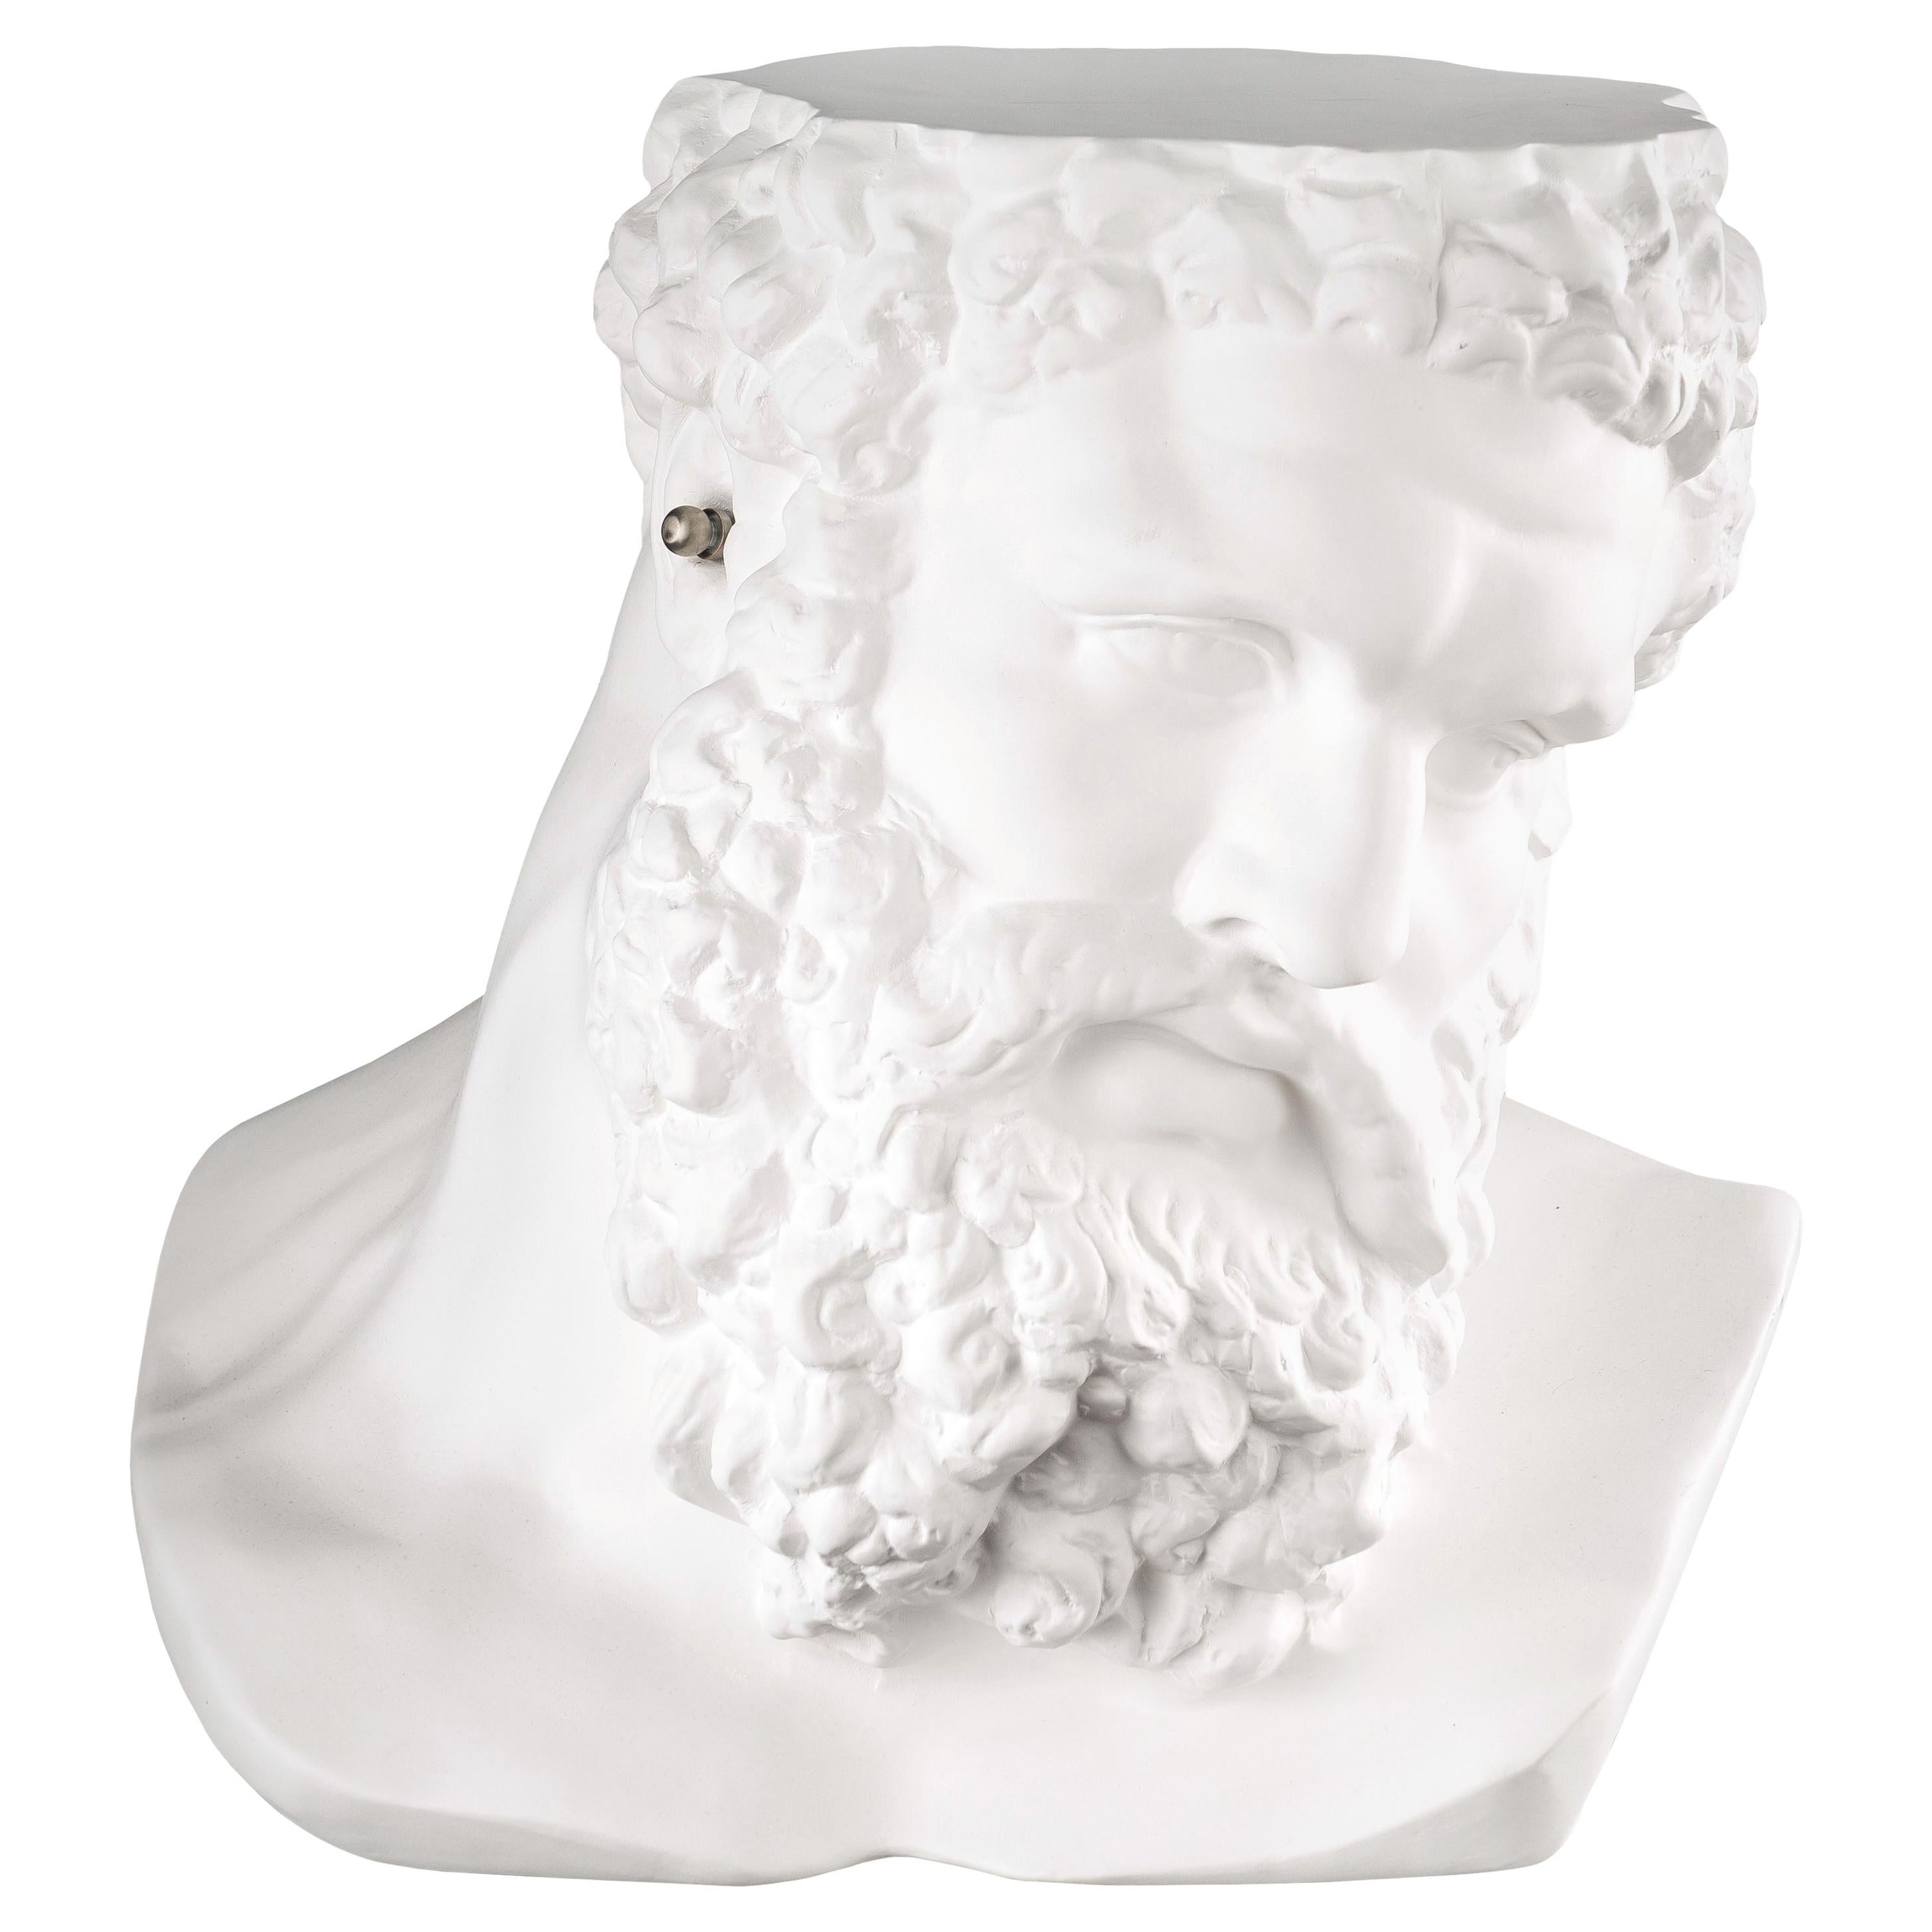 Bust Ercole "Don't Hear", Small Table, Sculpture, in Matte White Ceramic, Italy